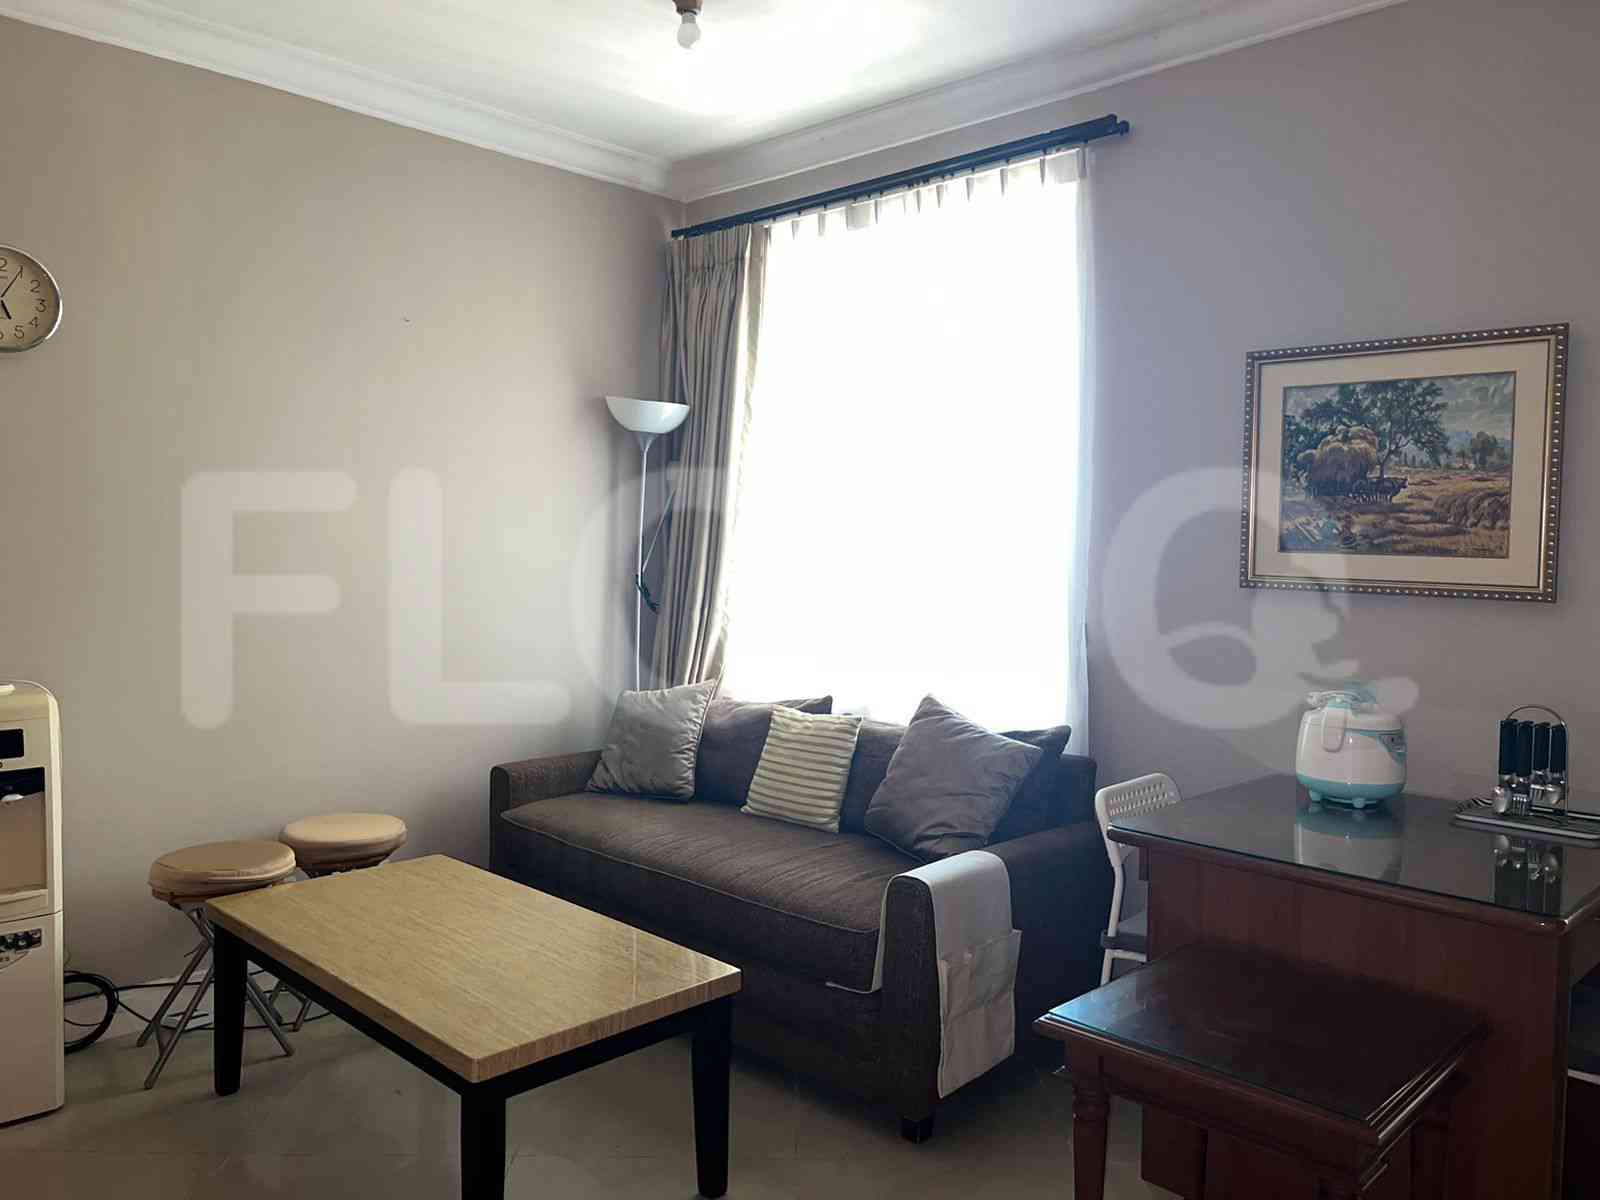 1 Bedroom on 9th Floor for Rent in Batavia Apartment - fbe7ee 3